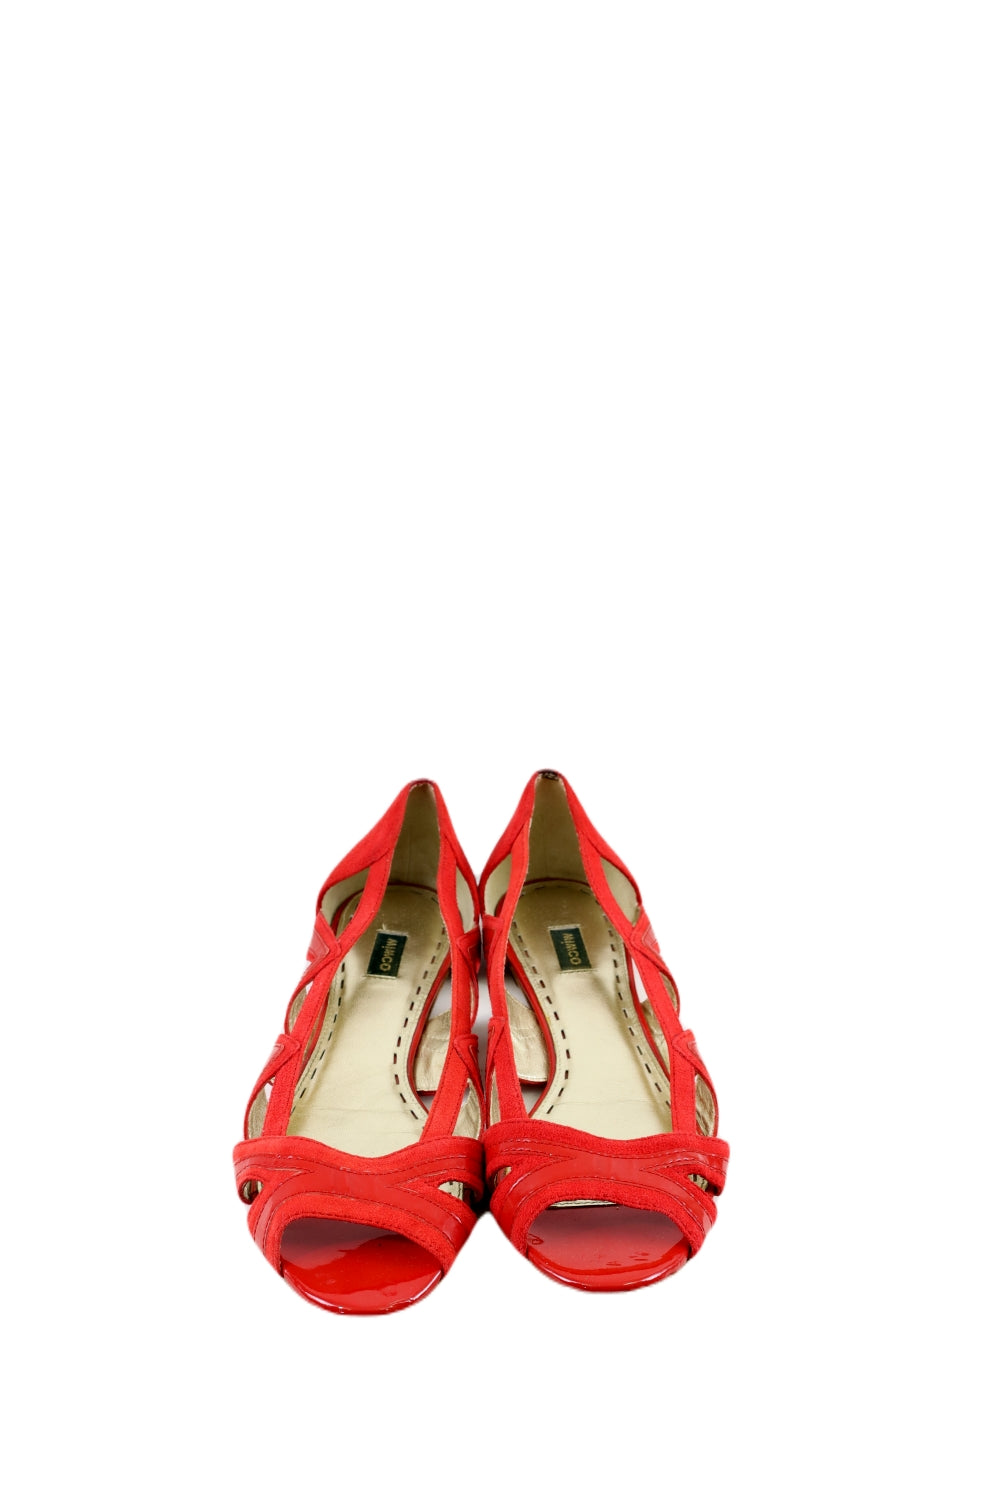 Mimco Red Flats 37